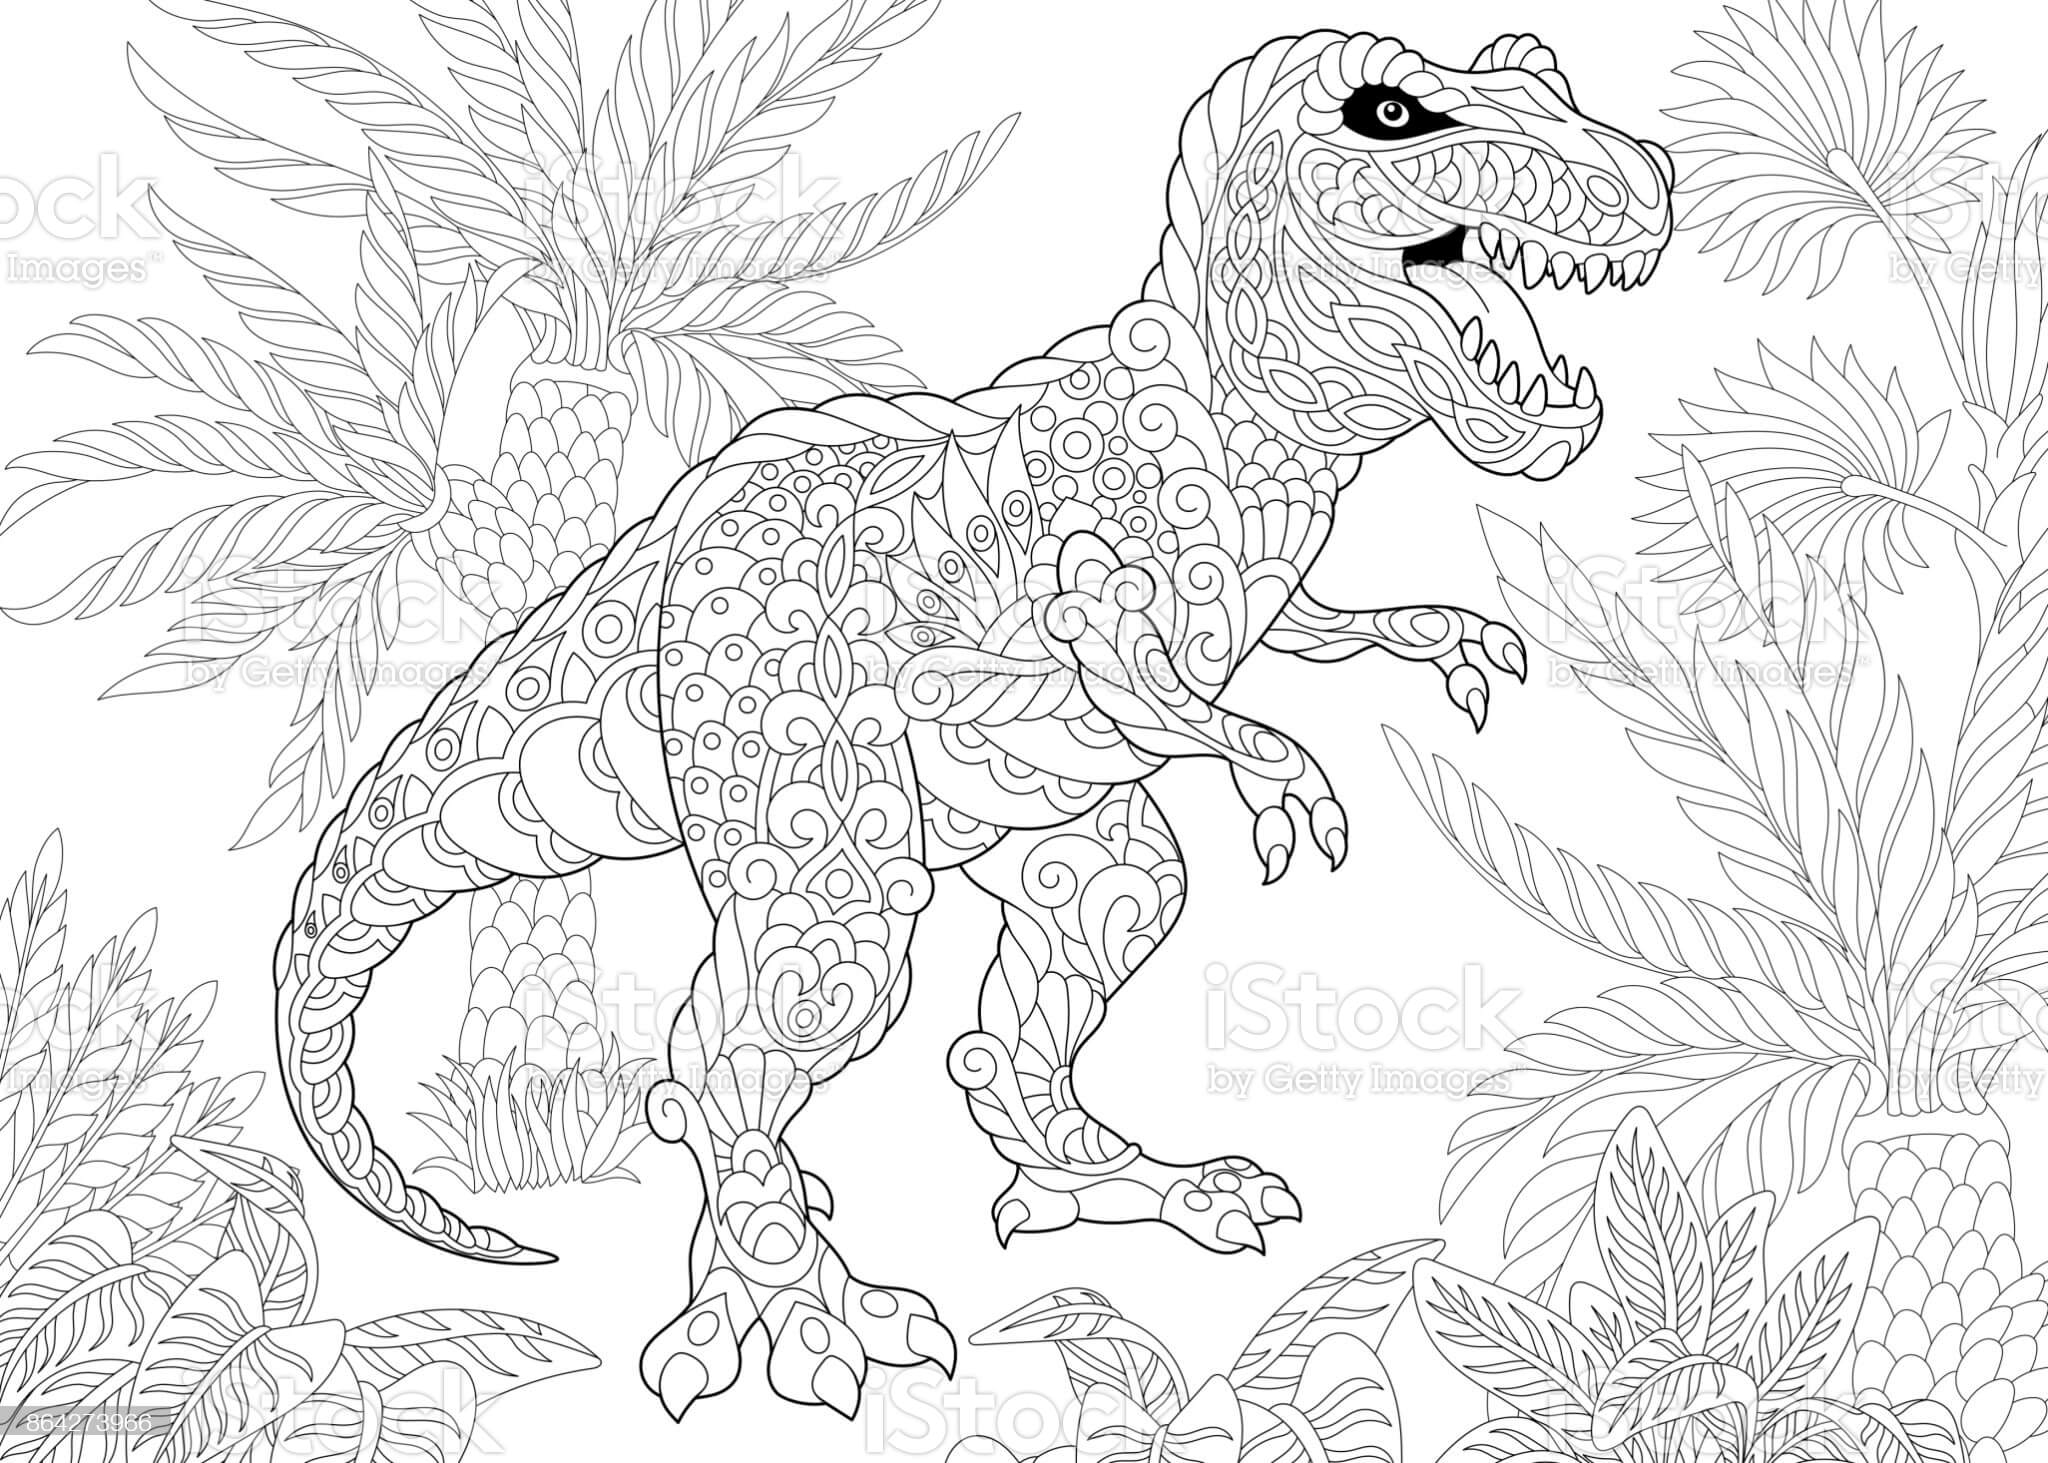 scary t rex coloring page | t rex coloring pages for preschoolers | jurassic world t rex coloring pages